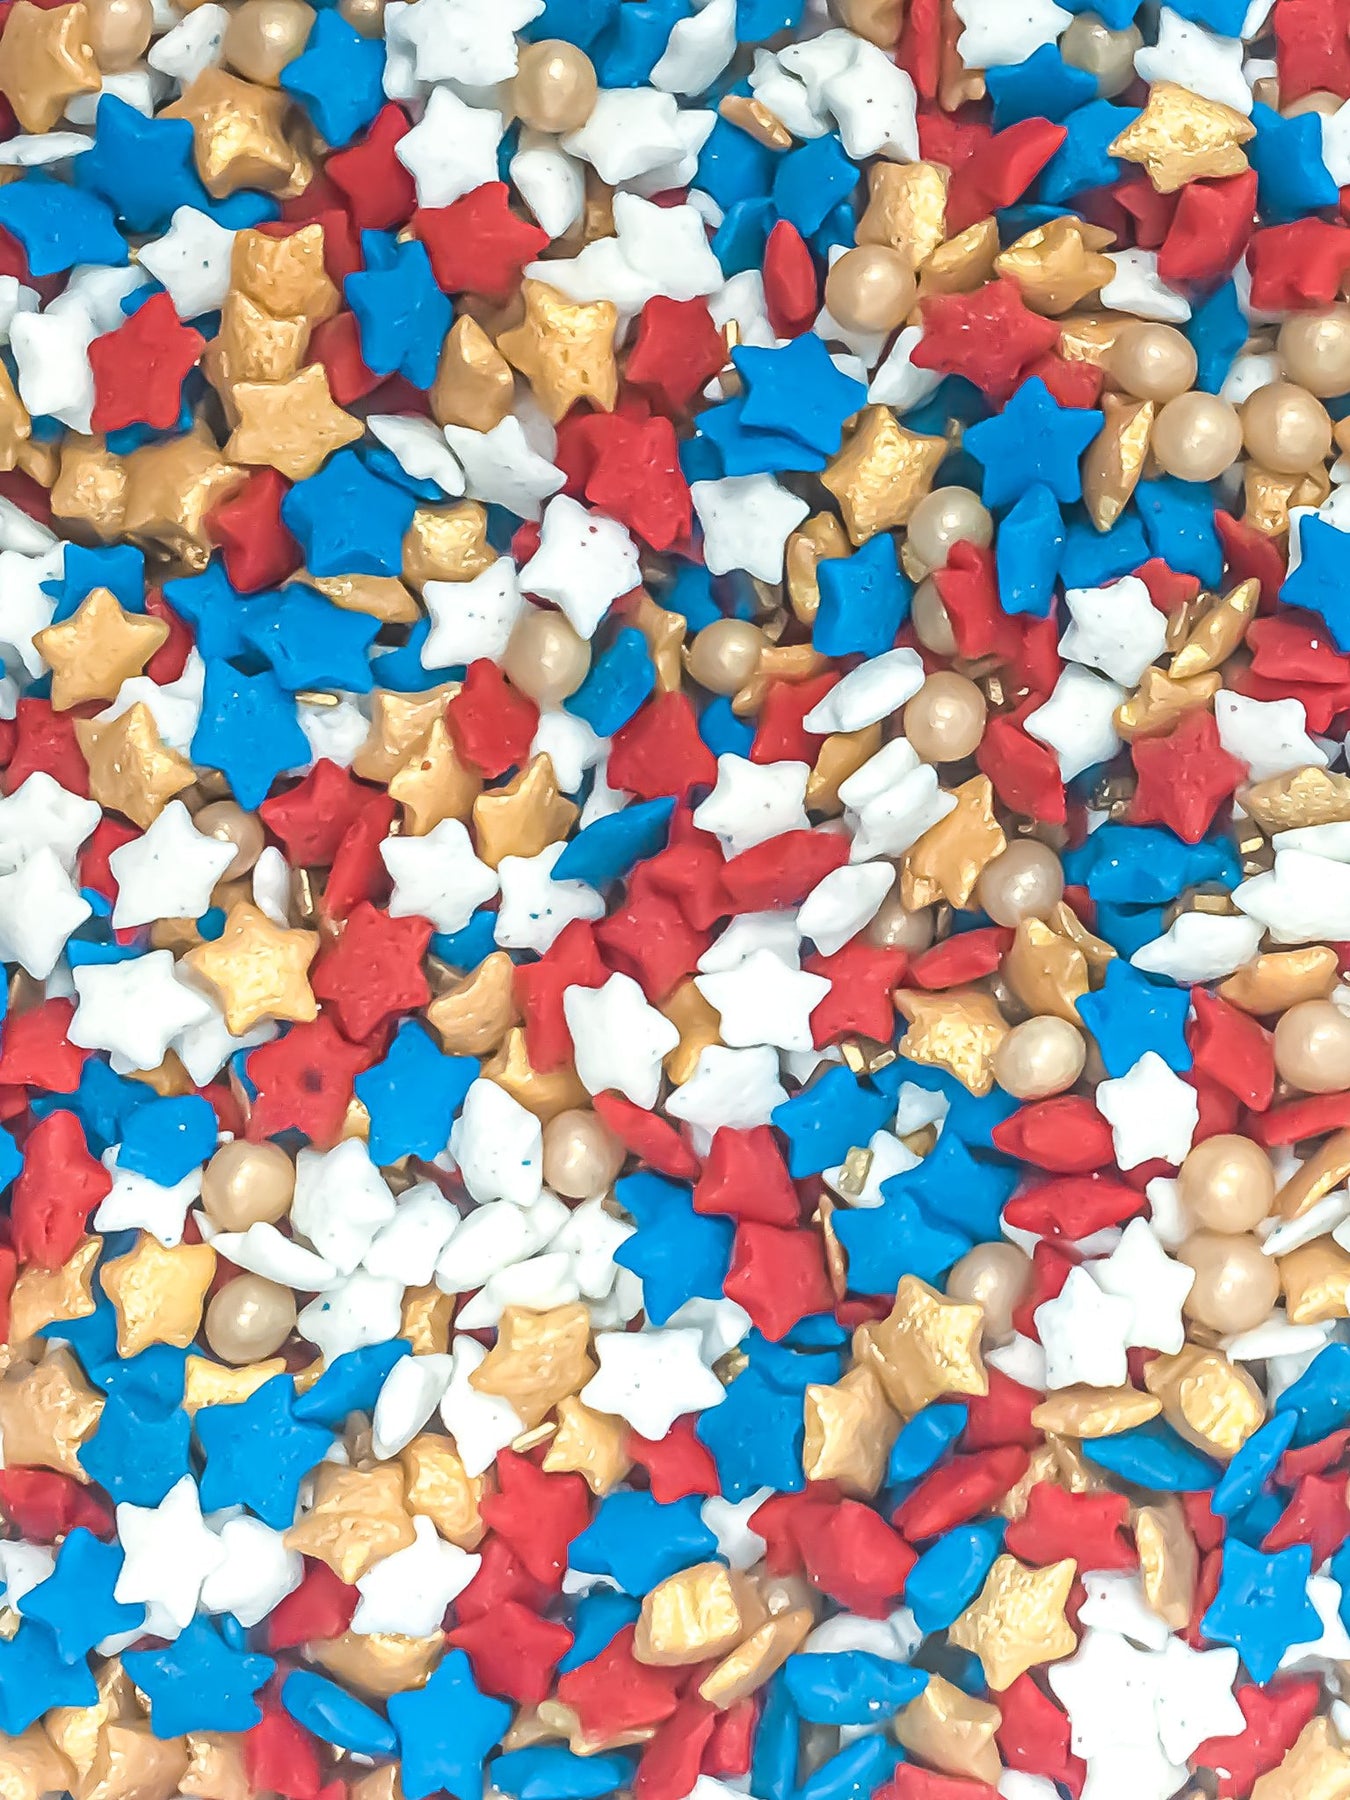 Memorial Day Sprinkles - Patriotic Star Sprinkles 10 Ounce - Fourth of July  - Red White and Blue Sprinkles for Cake Decorating